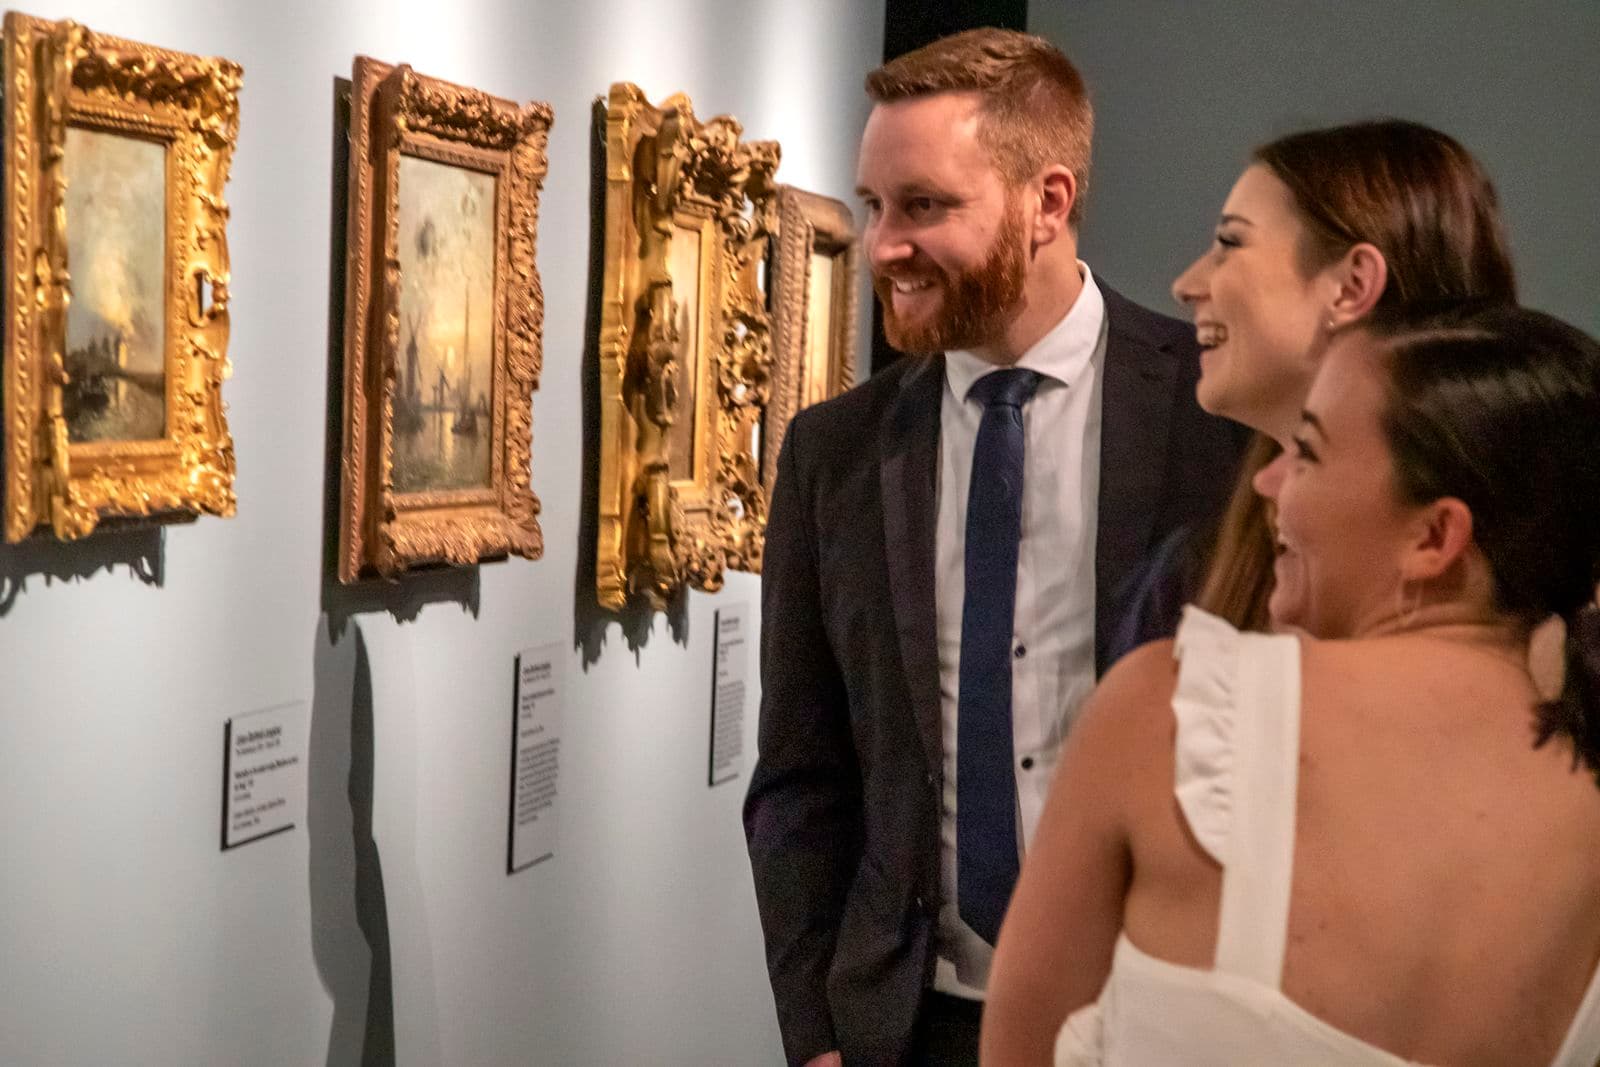 Two women and a man are smiling looking at works of art on a wall